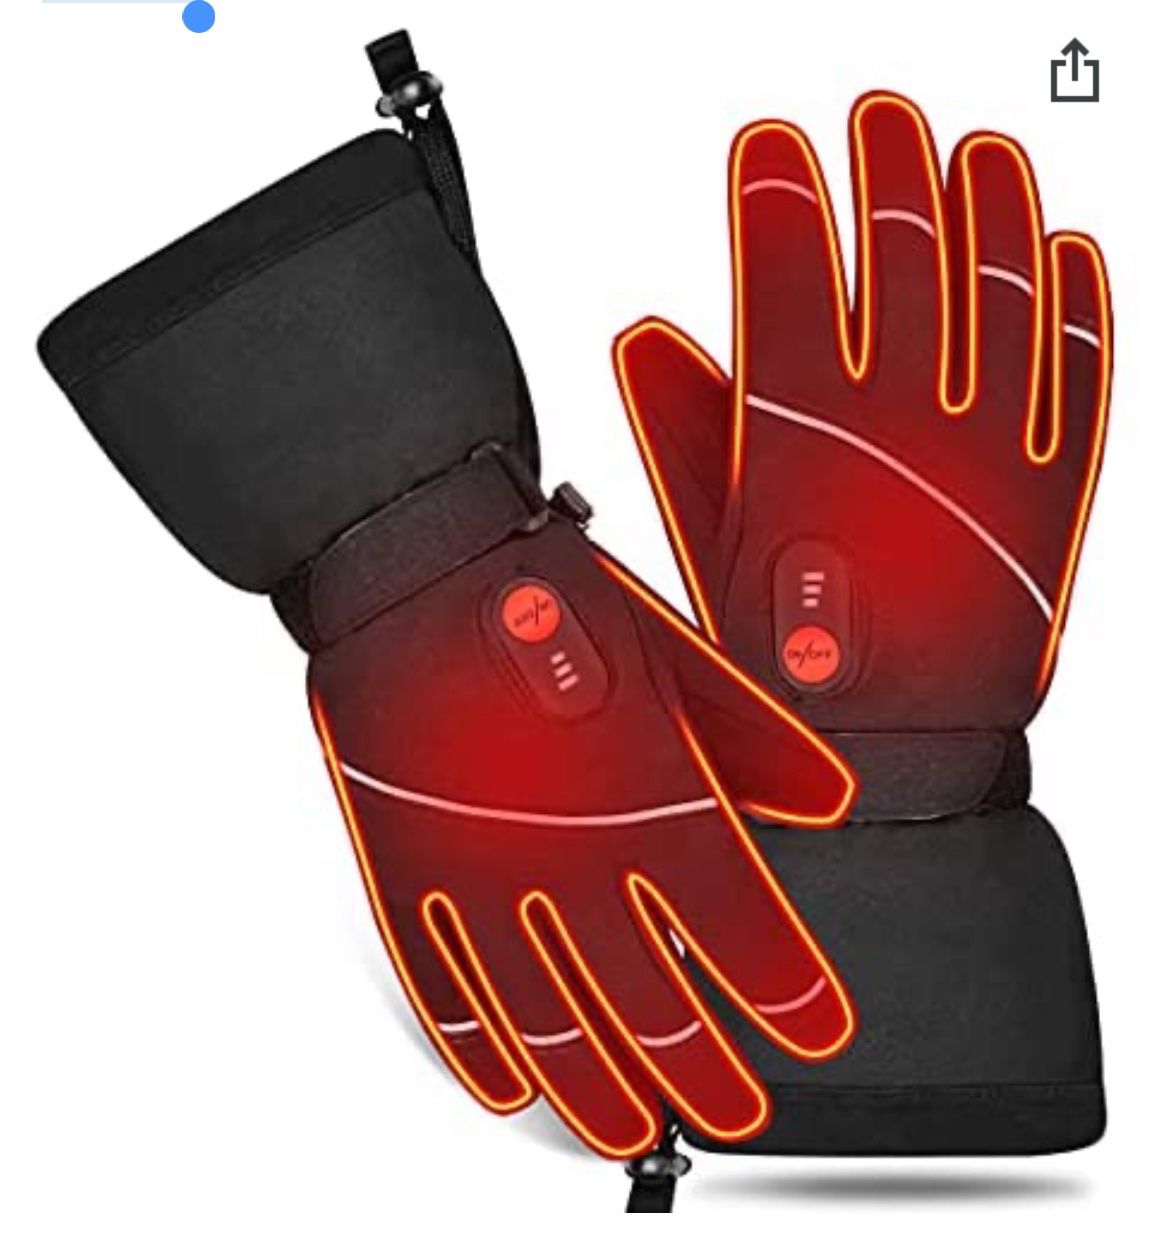 Electrical Heated Gloves Rechargeable - Batteries Gloves for Men Women,Winter Thermal Gloves for Outdoor Motorcycling Skiing Camping Hunting Climbing 